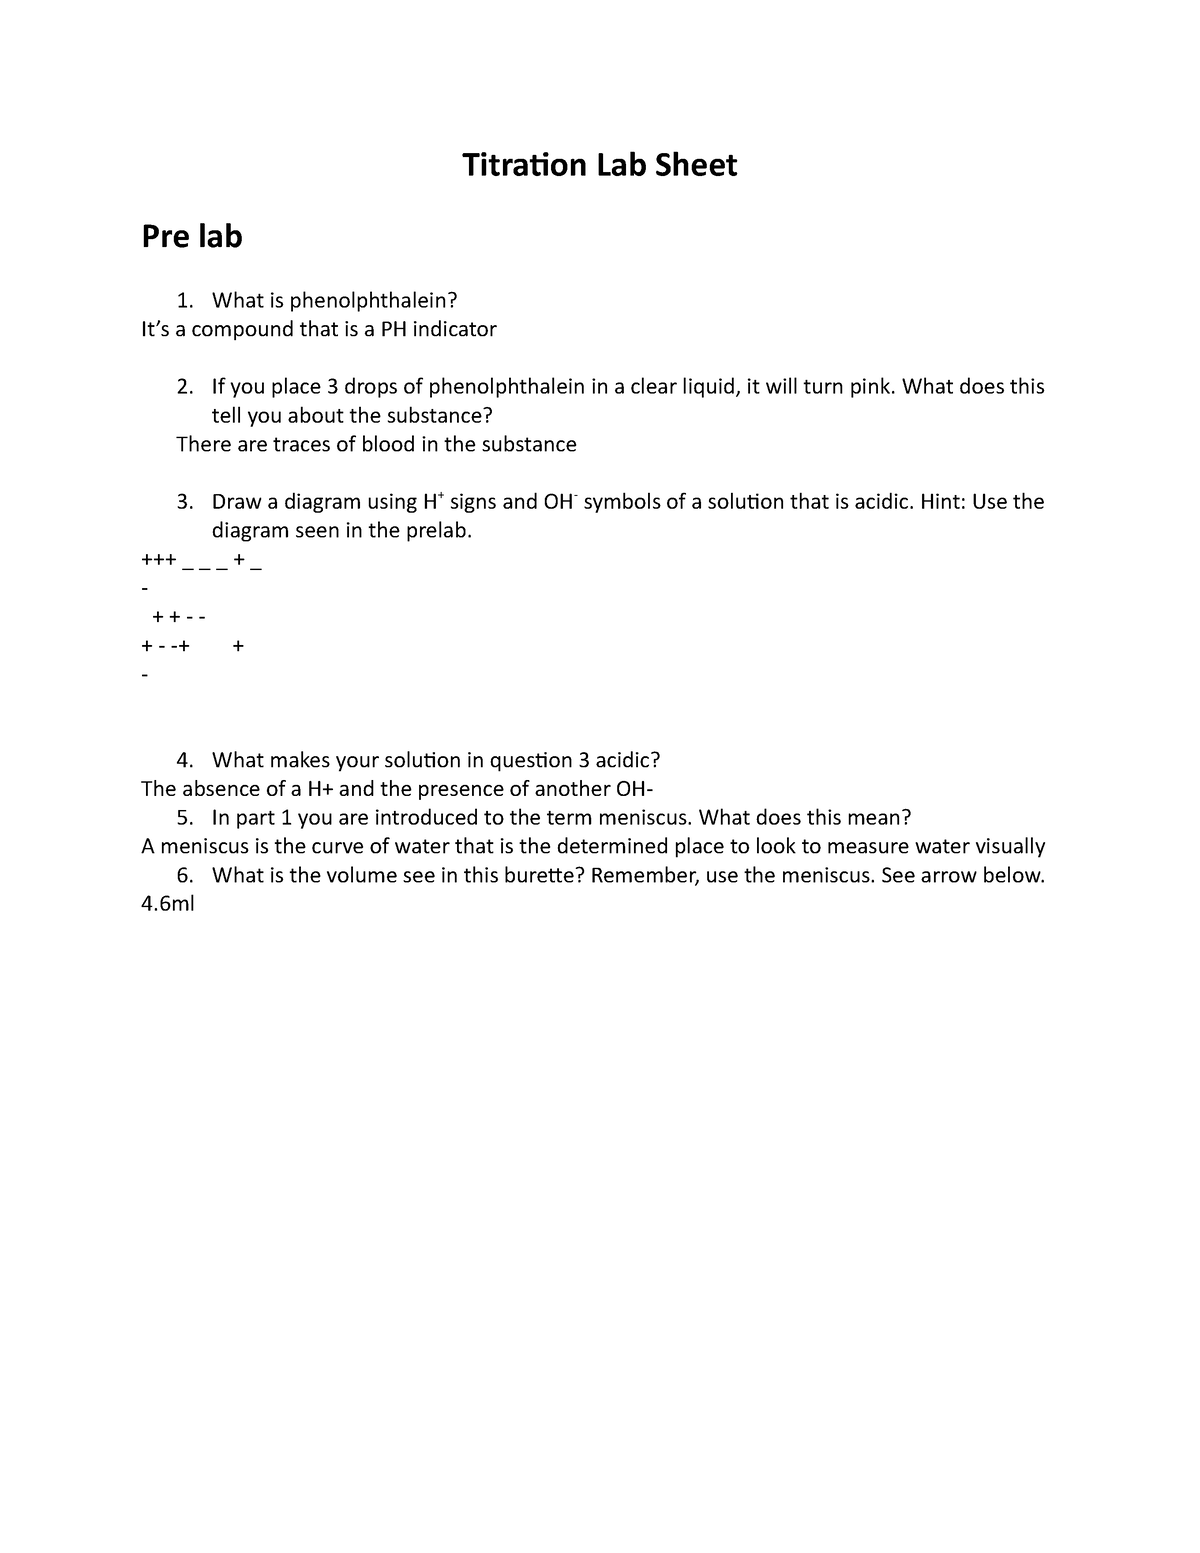 lab titration assignment reflect on the lab